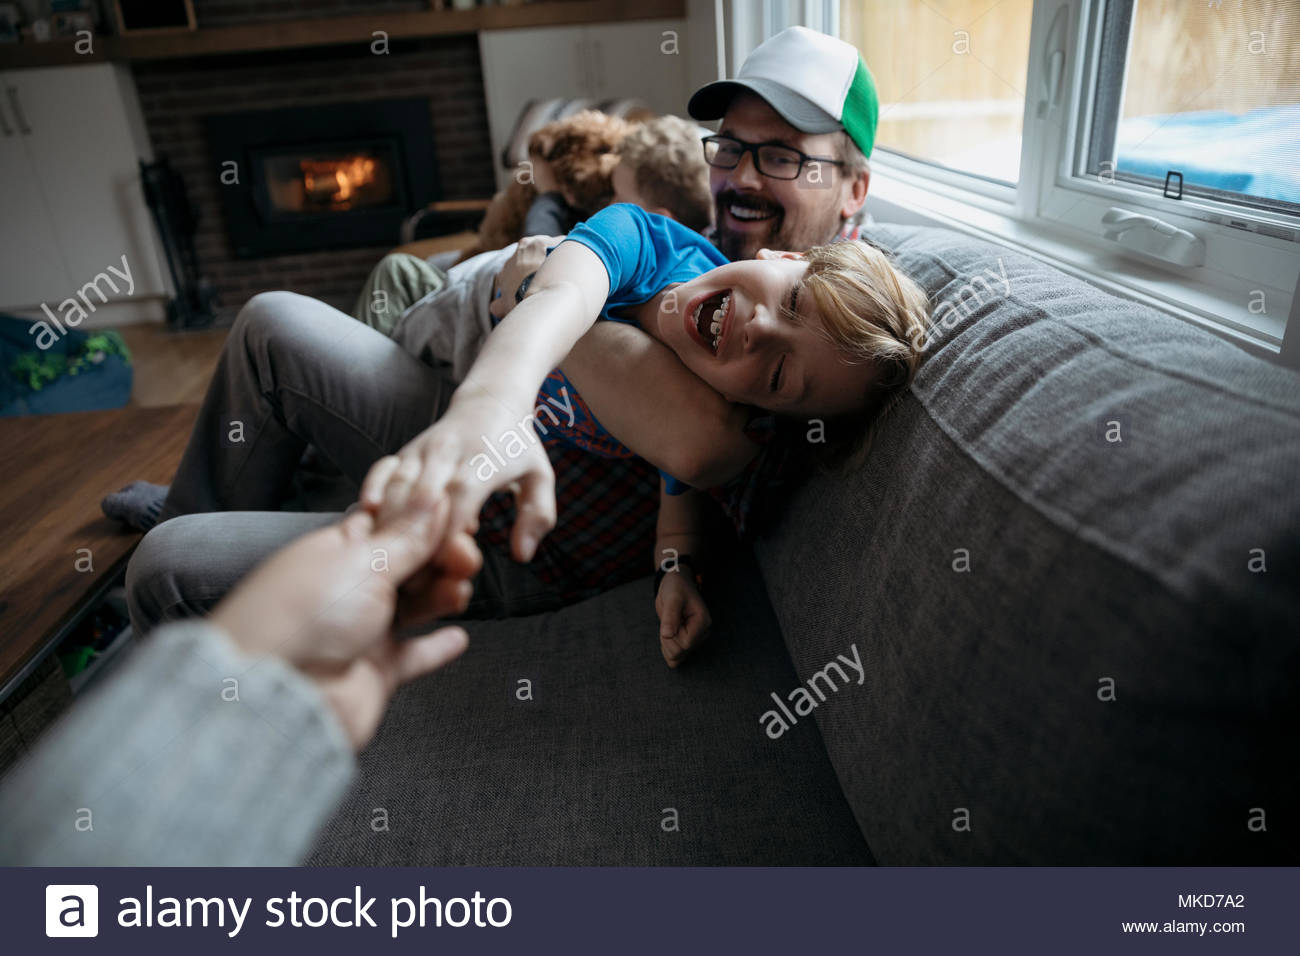 Personal perspective family playing on living room sofa Stock Photo